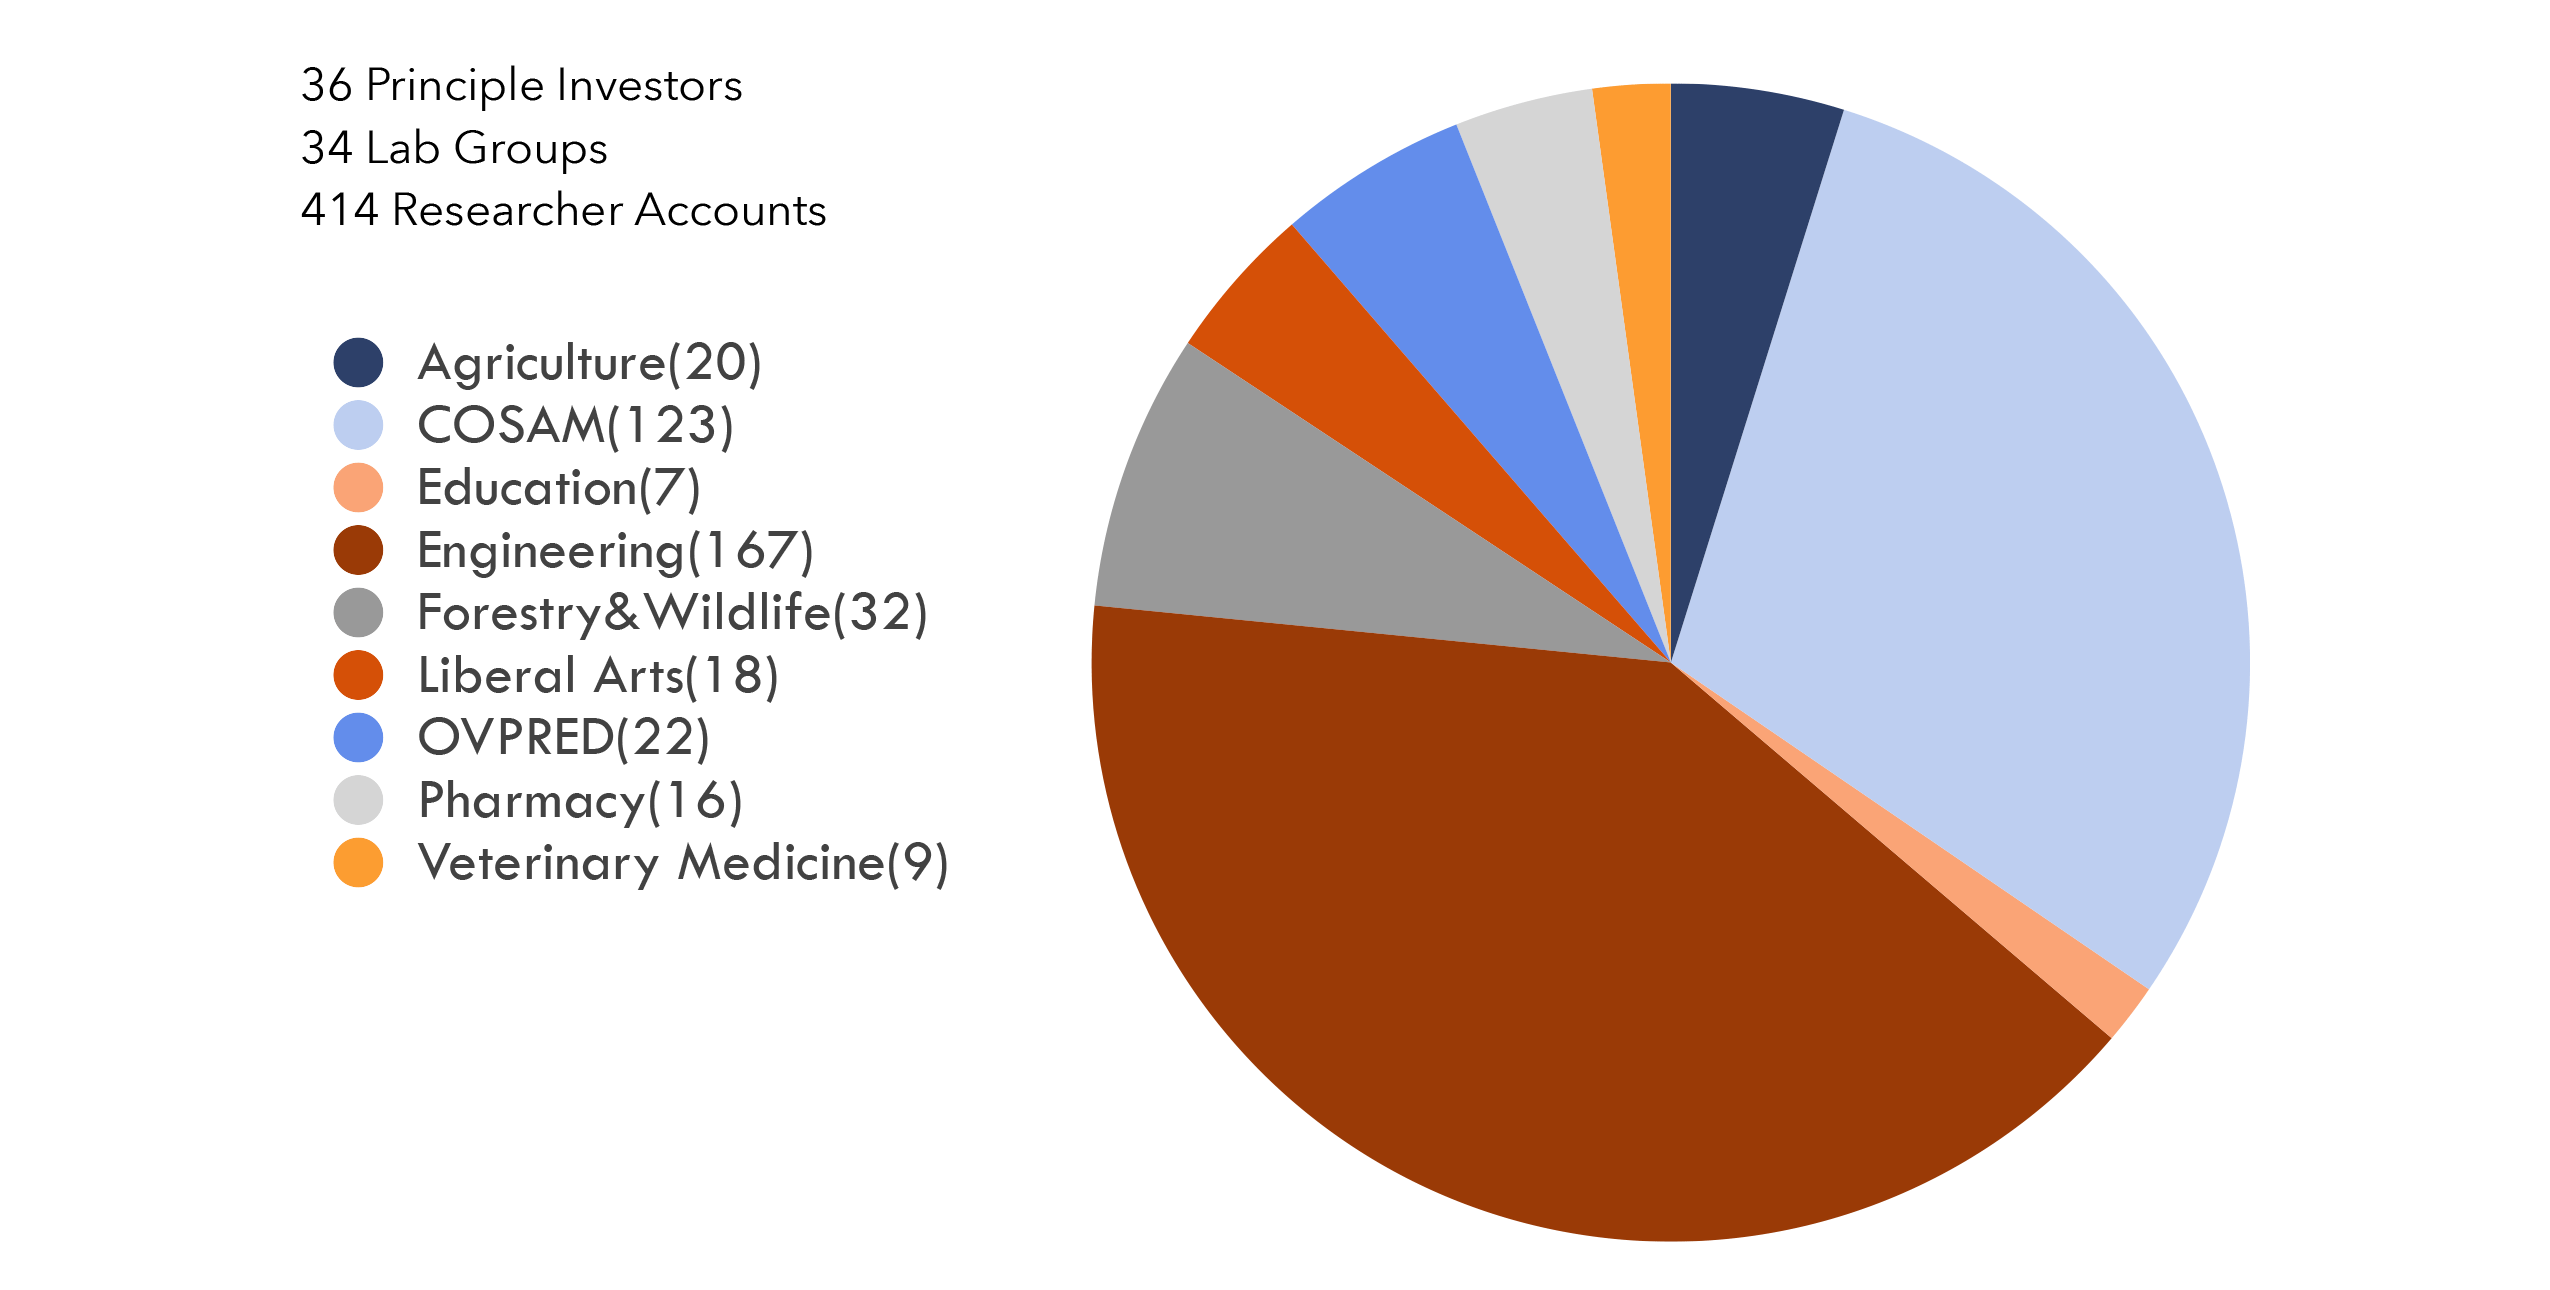 A graph showing the breakdown of 414 HPC research accounts by academic unit. Ag has 20, COSAM has 123, Education has 7, Engineering has 167, Forestry has 32, Liberal Arts has 18, OVPRED has 22, Pharamcy has 16, and Vet Med has 9.